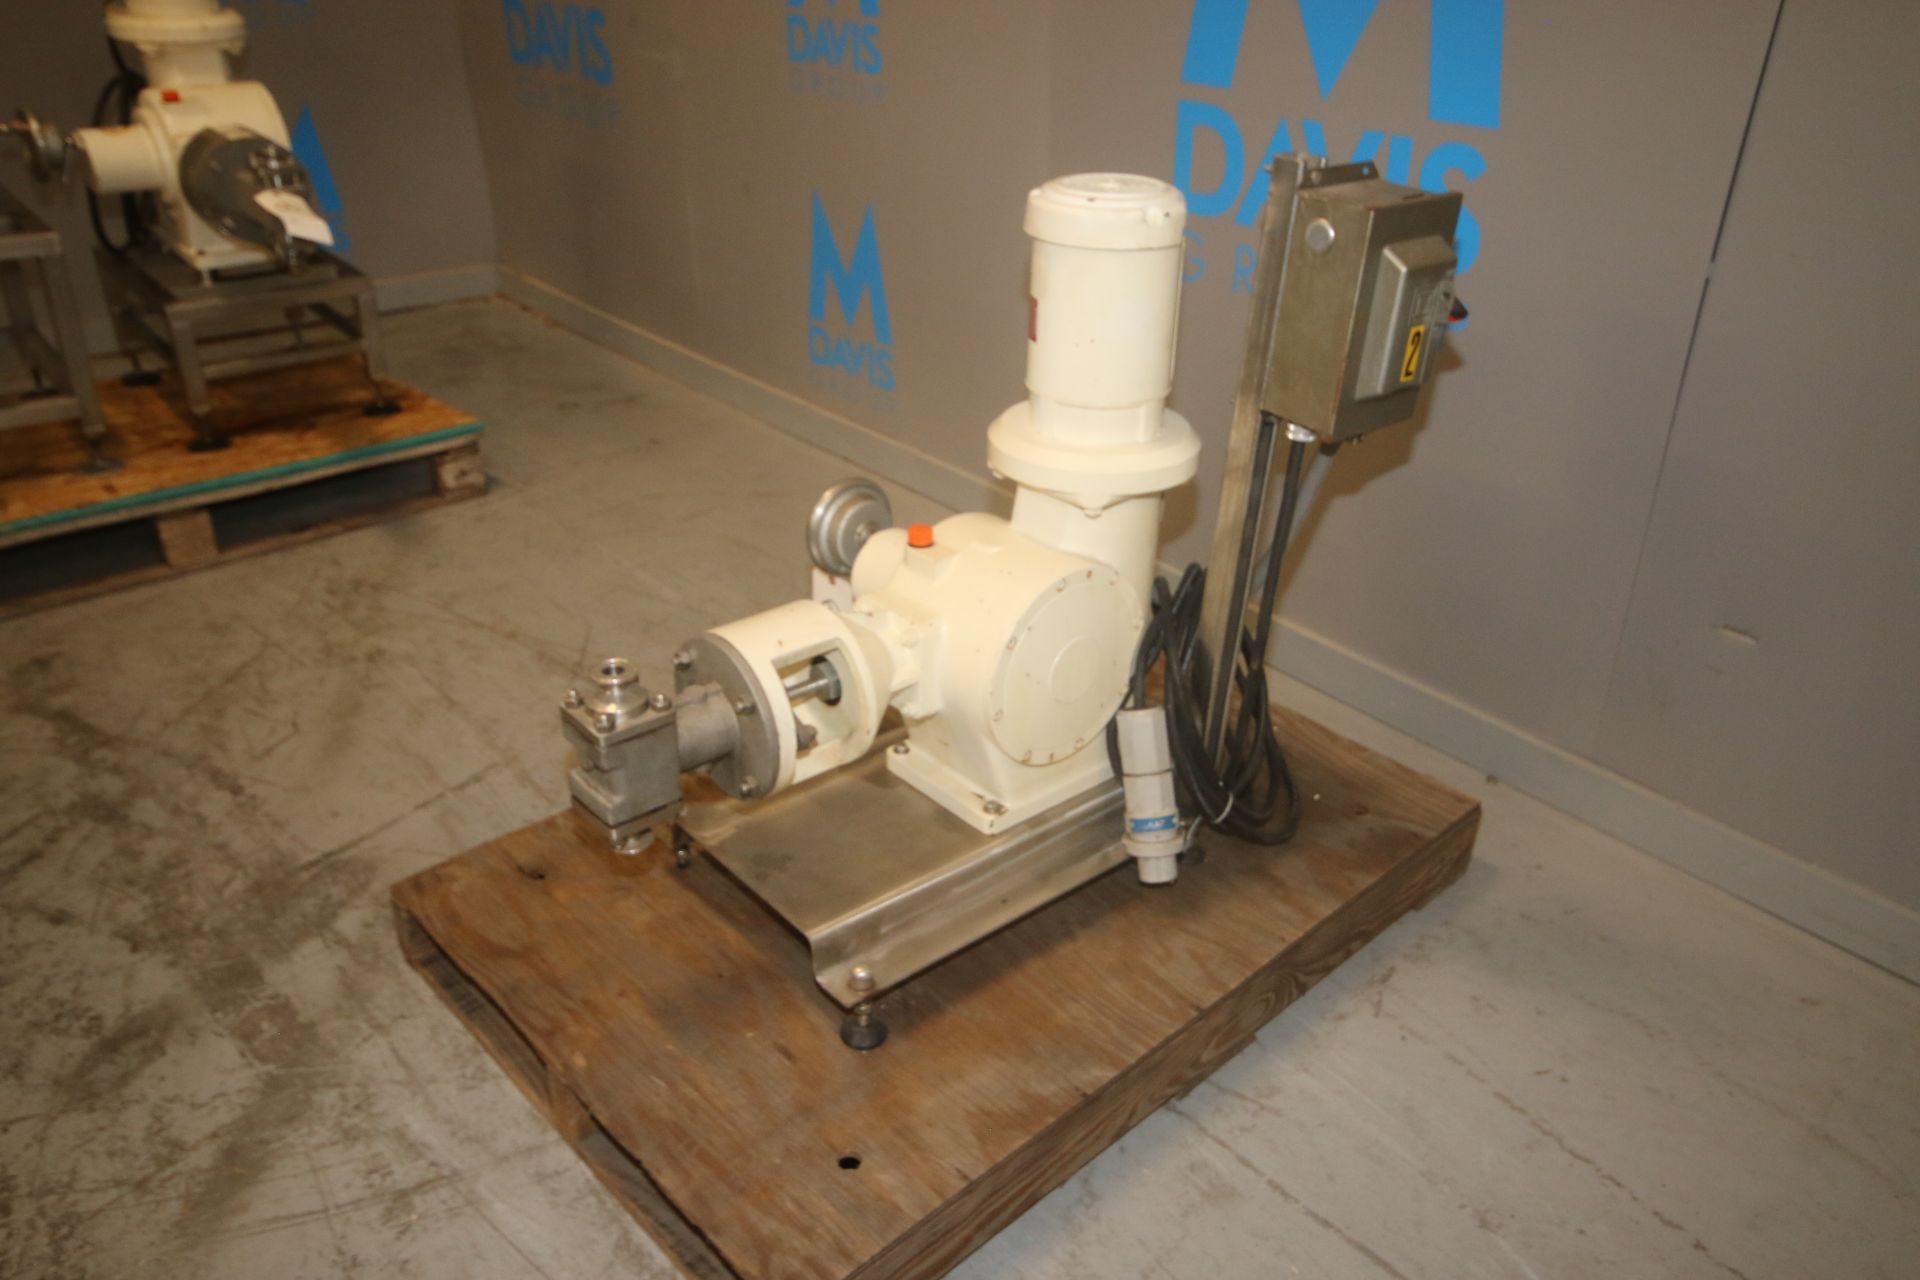 Bran - Lubbe Metering Pump, Type N-D431, S/N A9275, with 1.5" Clamp Type Connections, US Motors 2 hp - Image 2 of 9